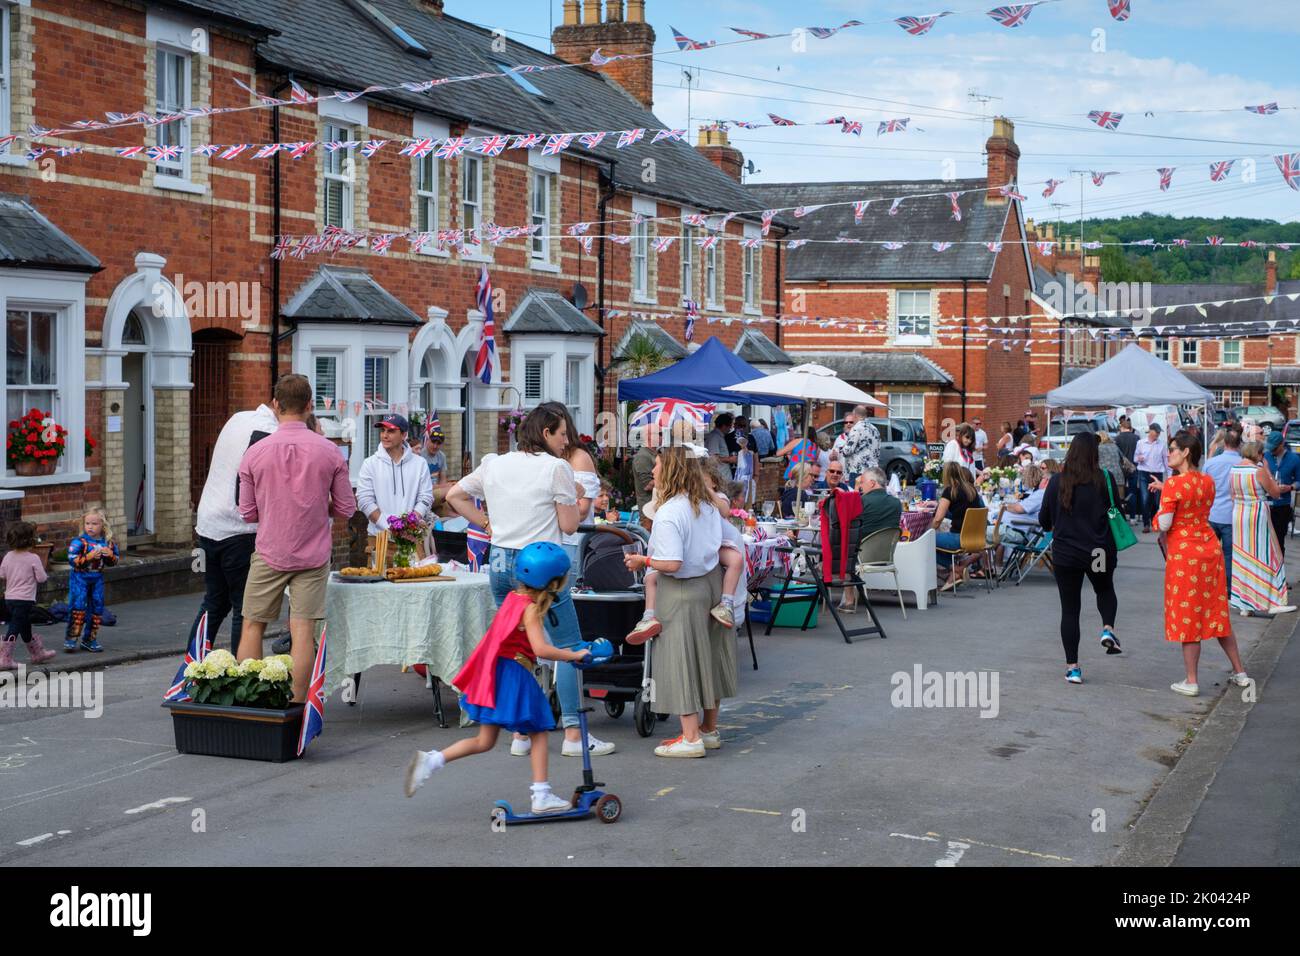 A street party held to celebrate the Platinum Jubilee of Her Majesty Queen Elizabeth II in the midst of Victorian terraced houses in Henley-on-Thames, Stock Photo